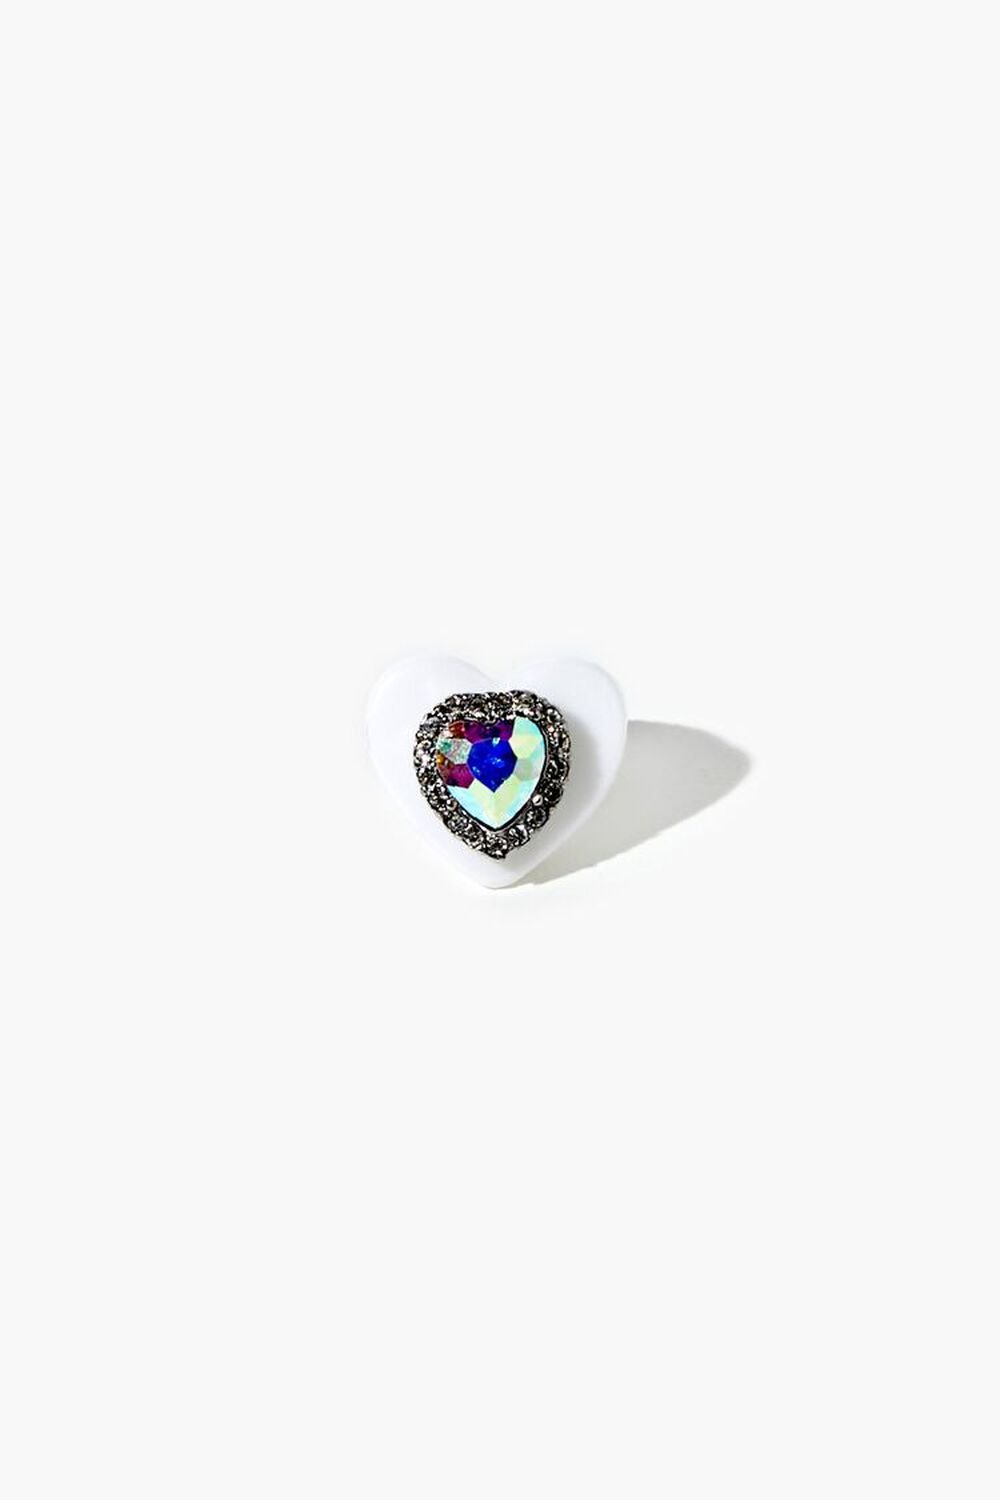 WHITE/MULTI Faux Gem Heart Cocktail Ring, image 1